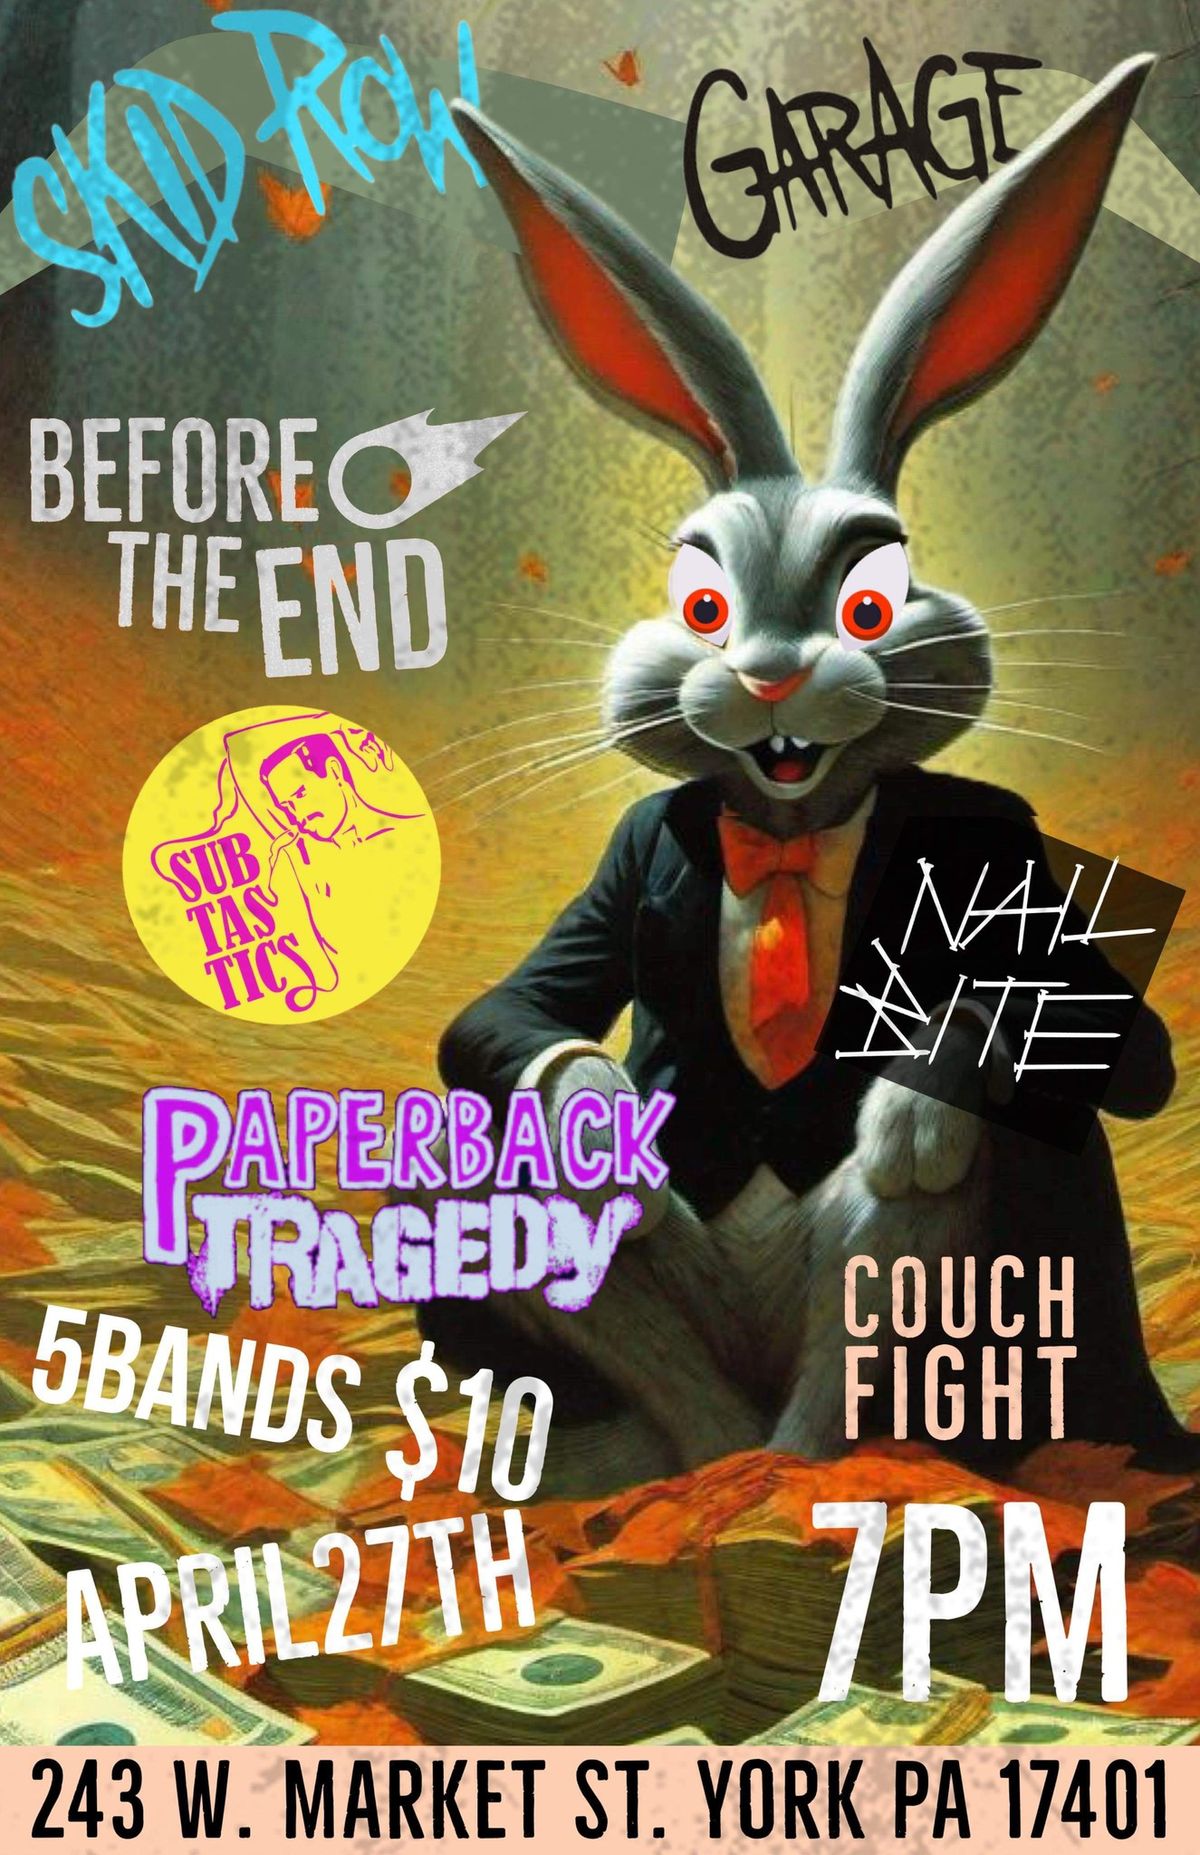 Before the End, Nail Bite, Subtastics, Paperback Tragedy, and Couch Fight at Skid Row Garage